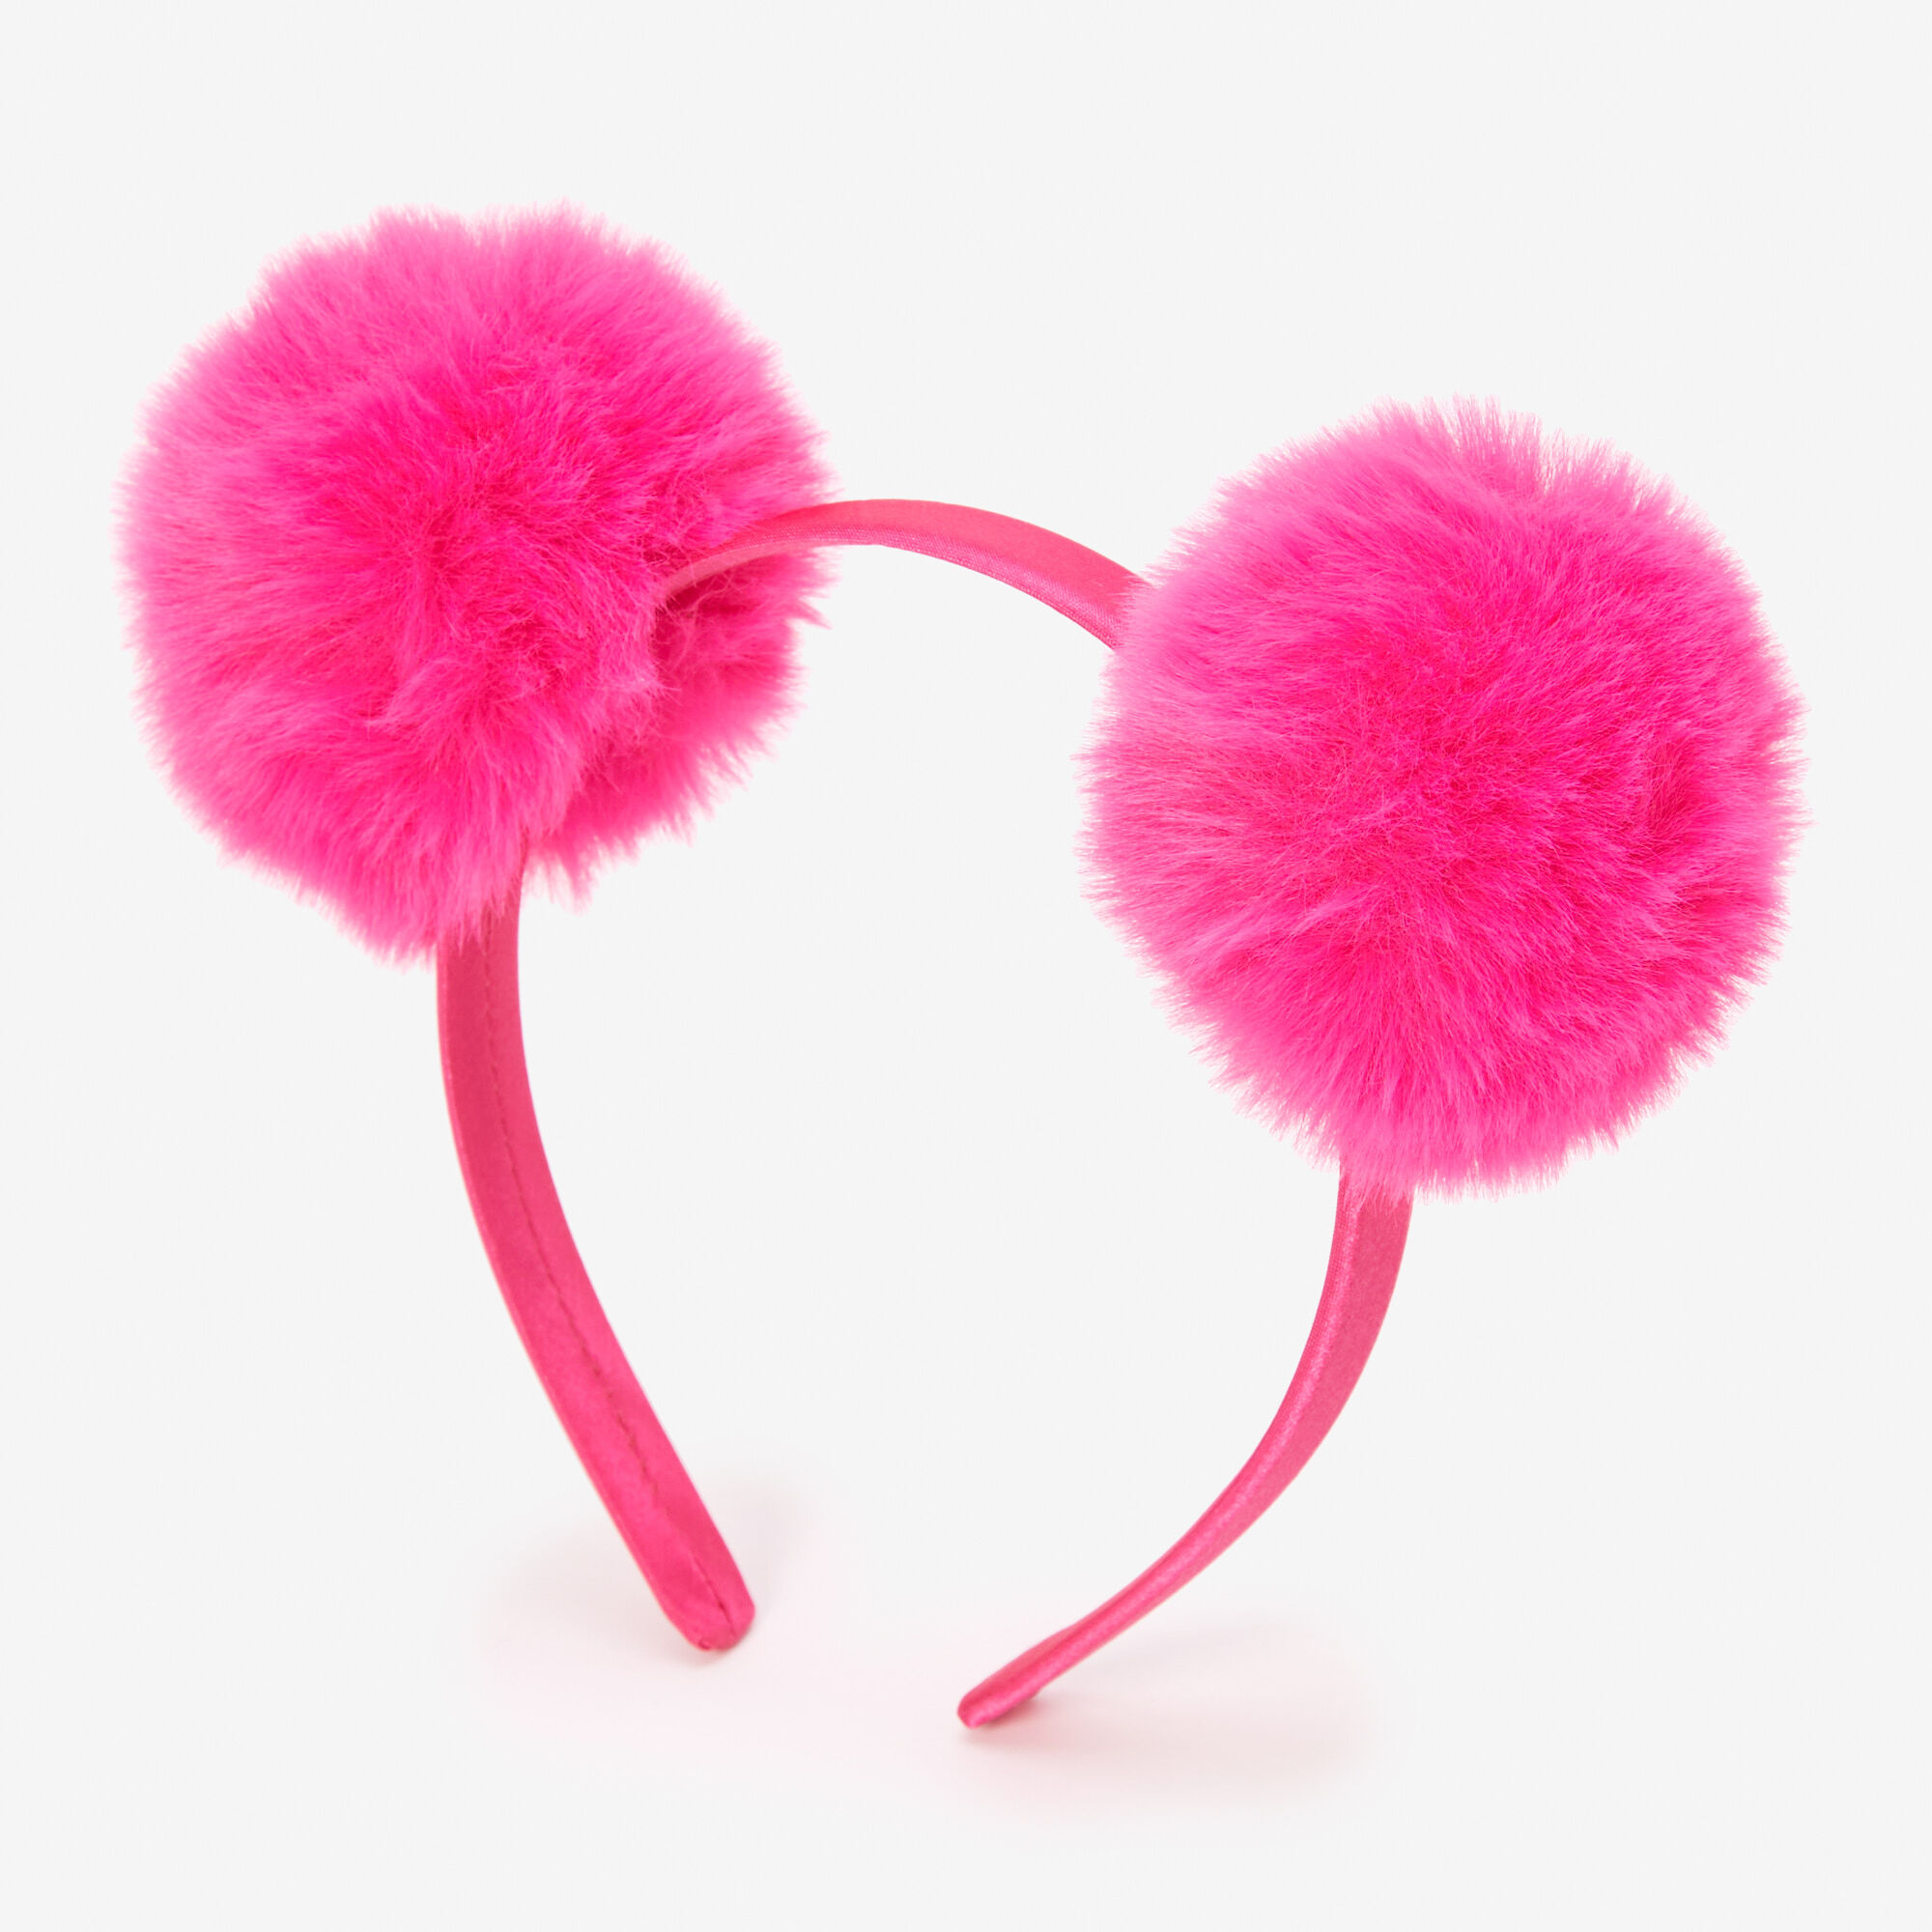 View Claires Pom Ears Headband Pink information